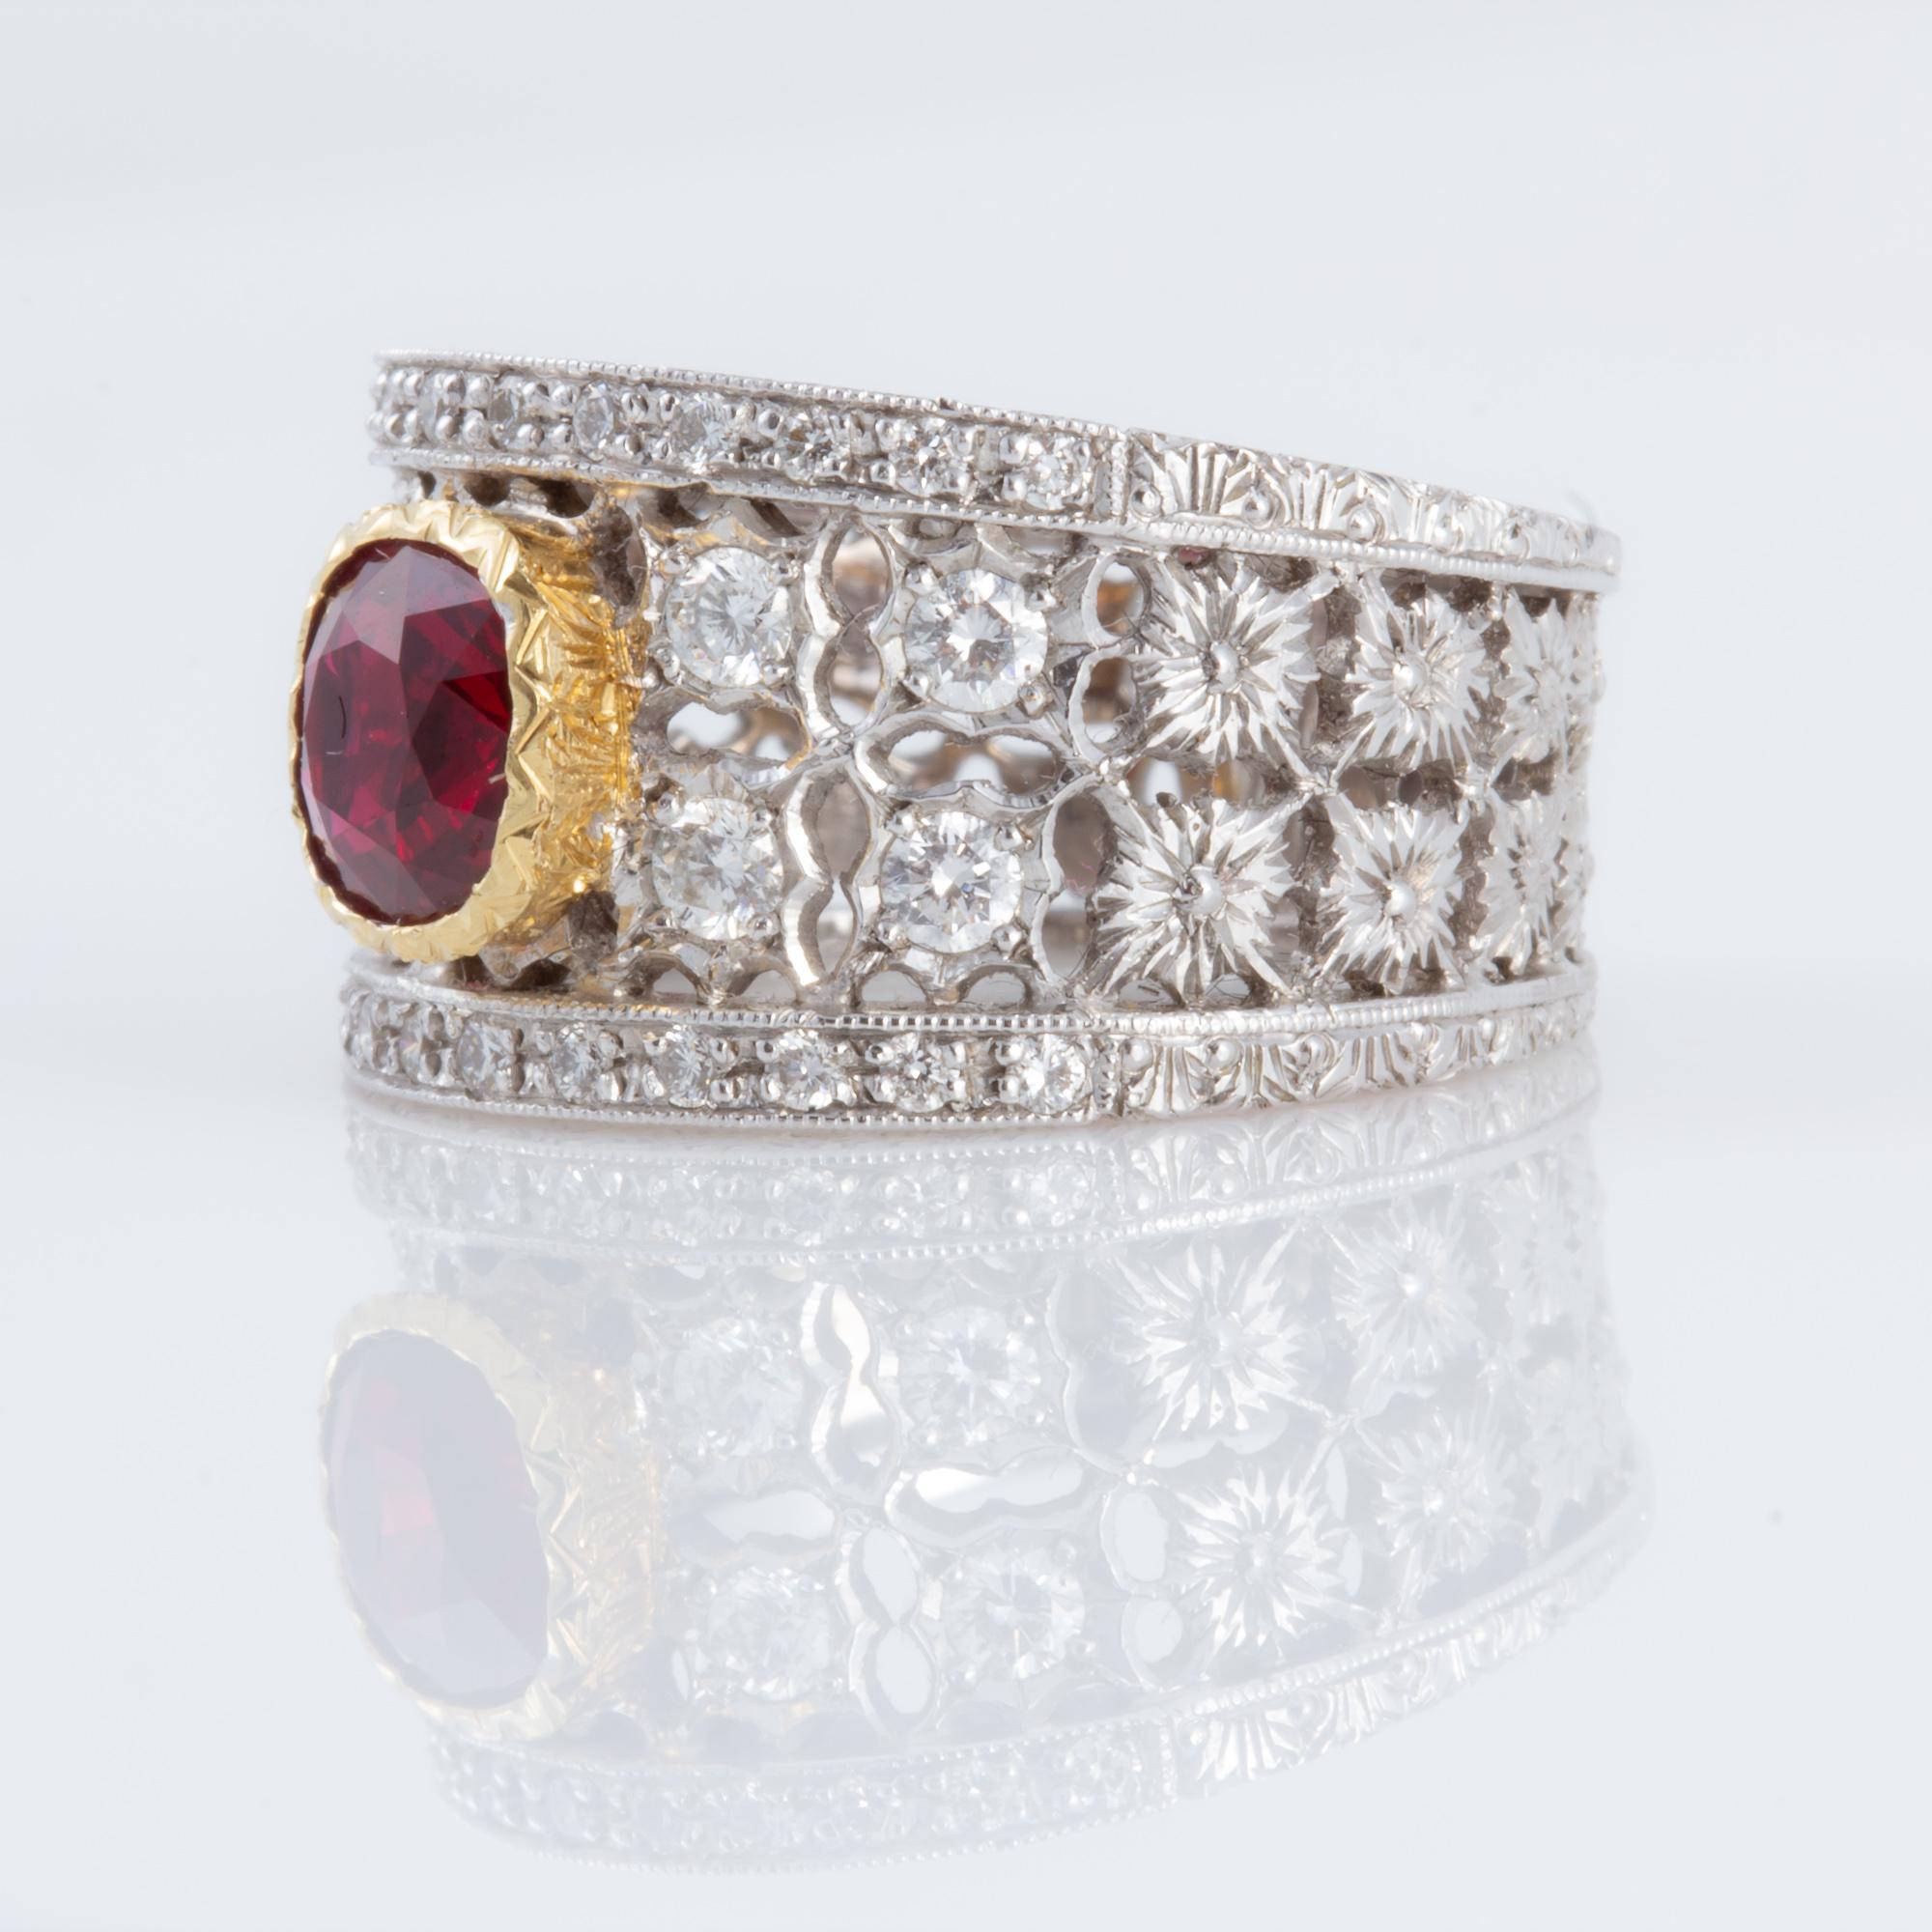 Featuring a 1.45 loupe clean and exceptionally well cut Ruby (Mozambique, H ) this beautiful band is a personal favorite.  Handcrafted by a small family run studio in Florence, Italy this style of artisanship has been produced for nearly 600